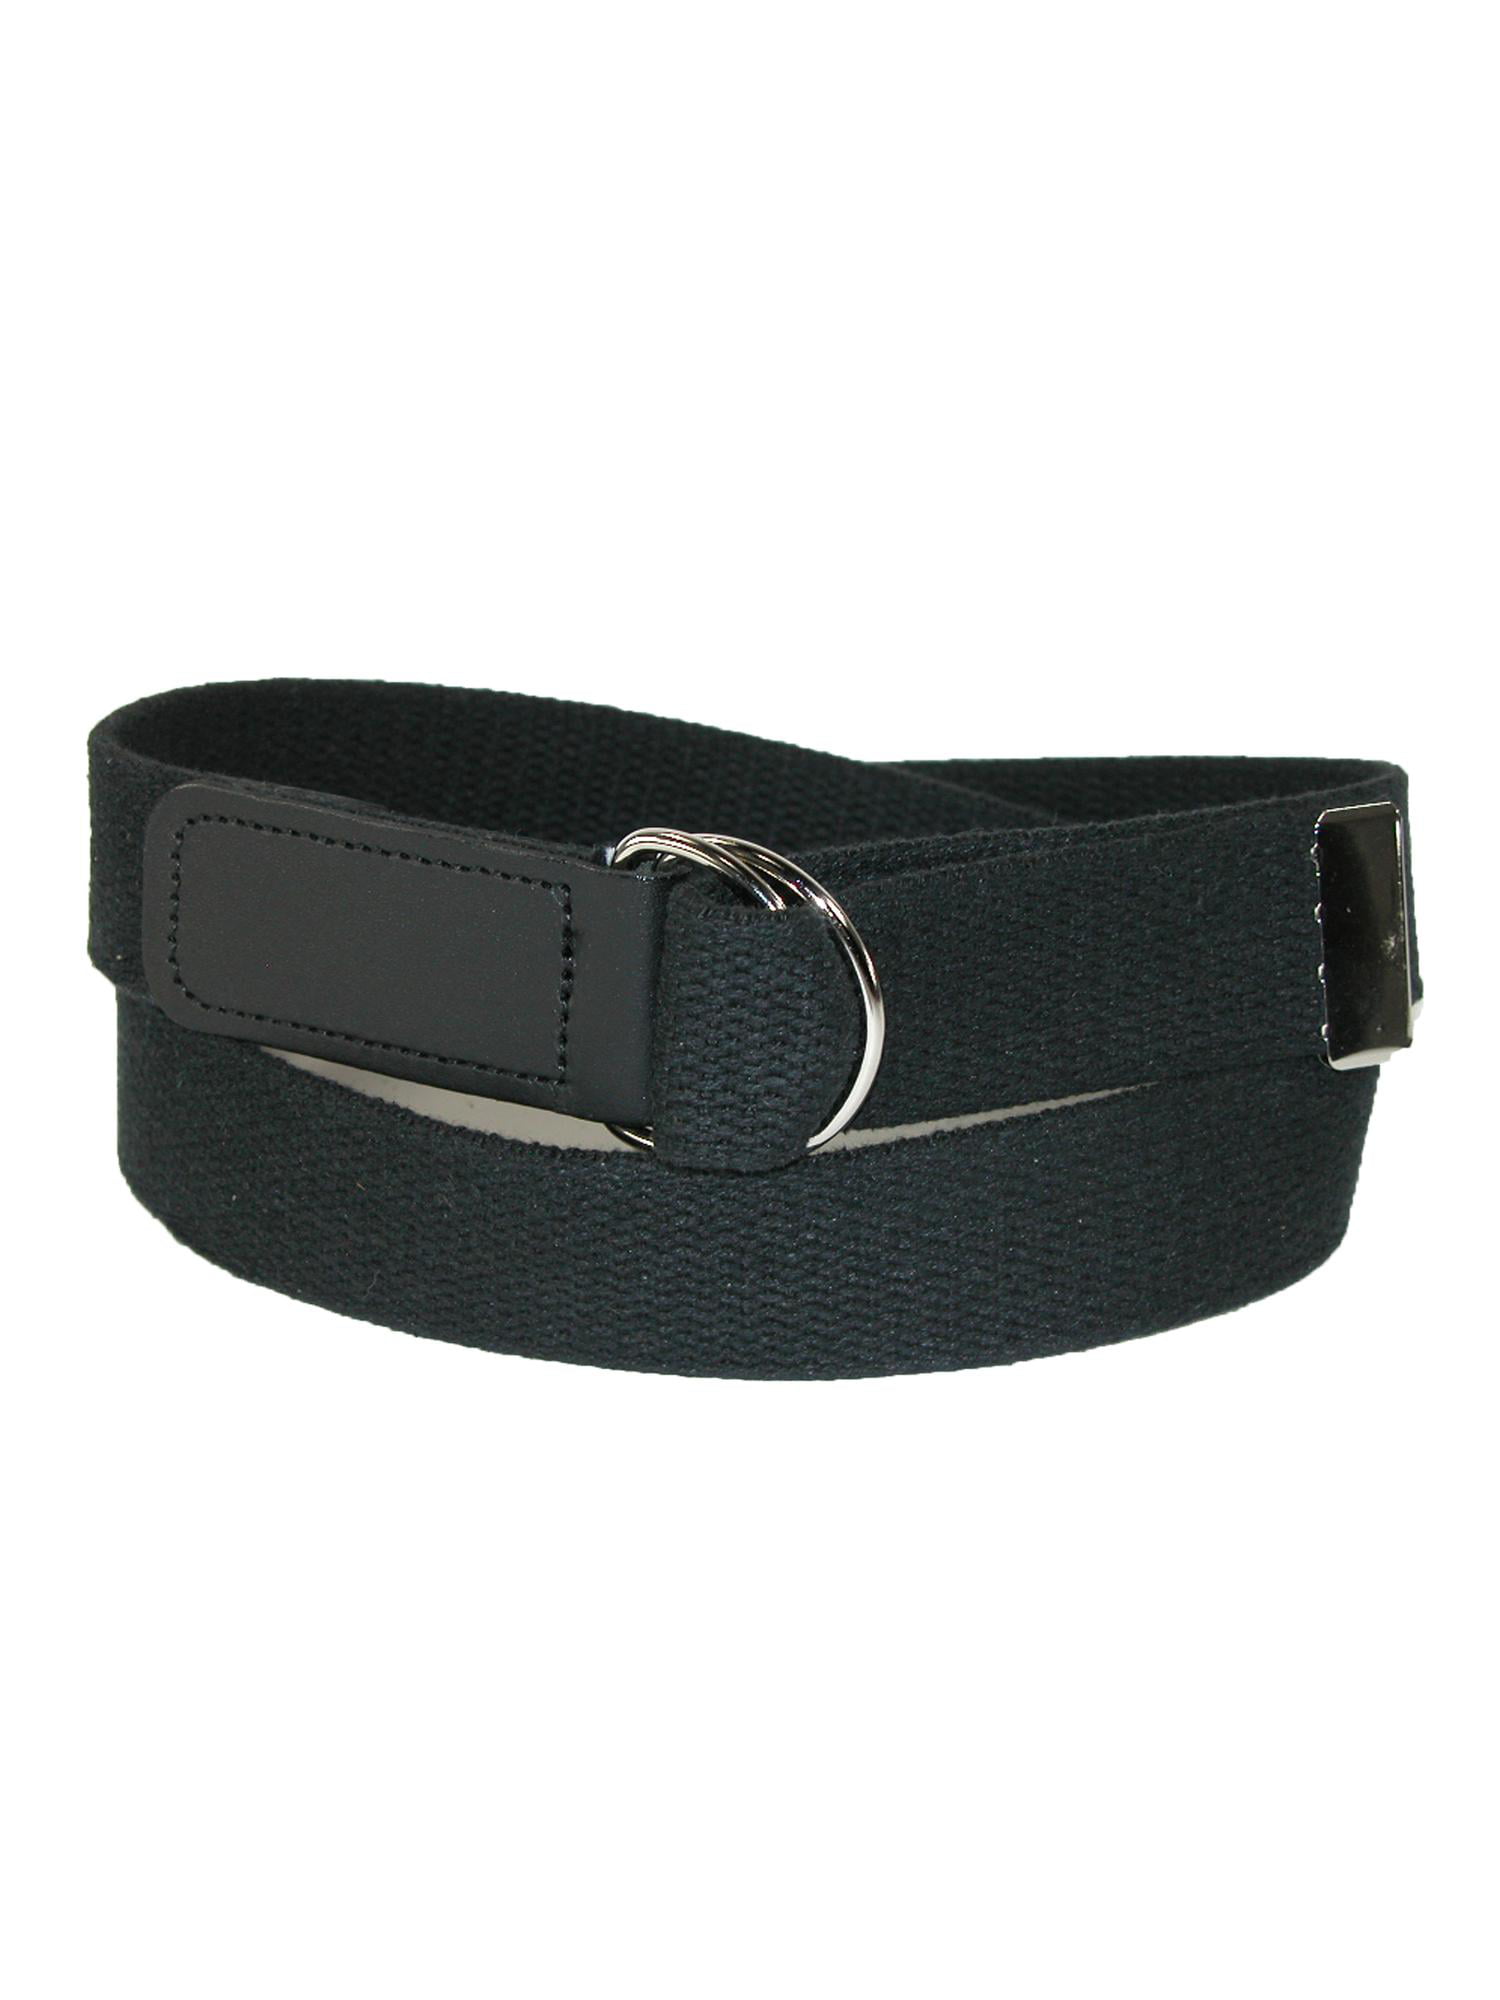 CTM - Size one size Cotton Web 1 1/4 Inch Belt with Double D Ring ...